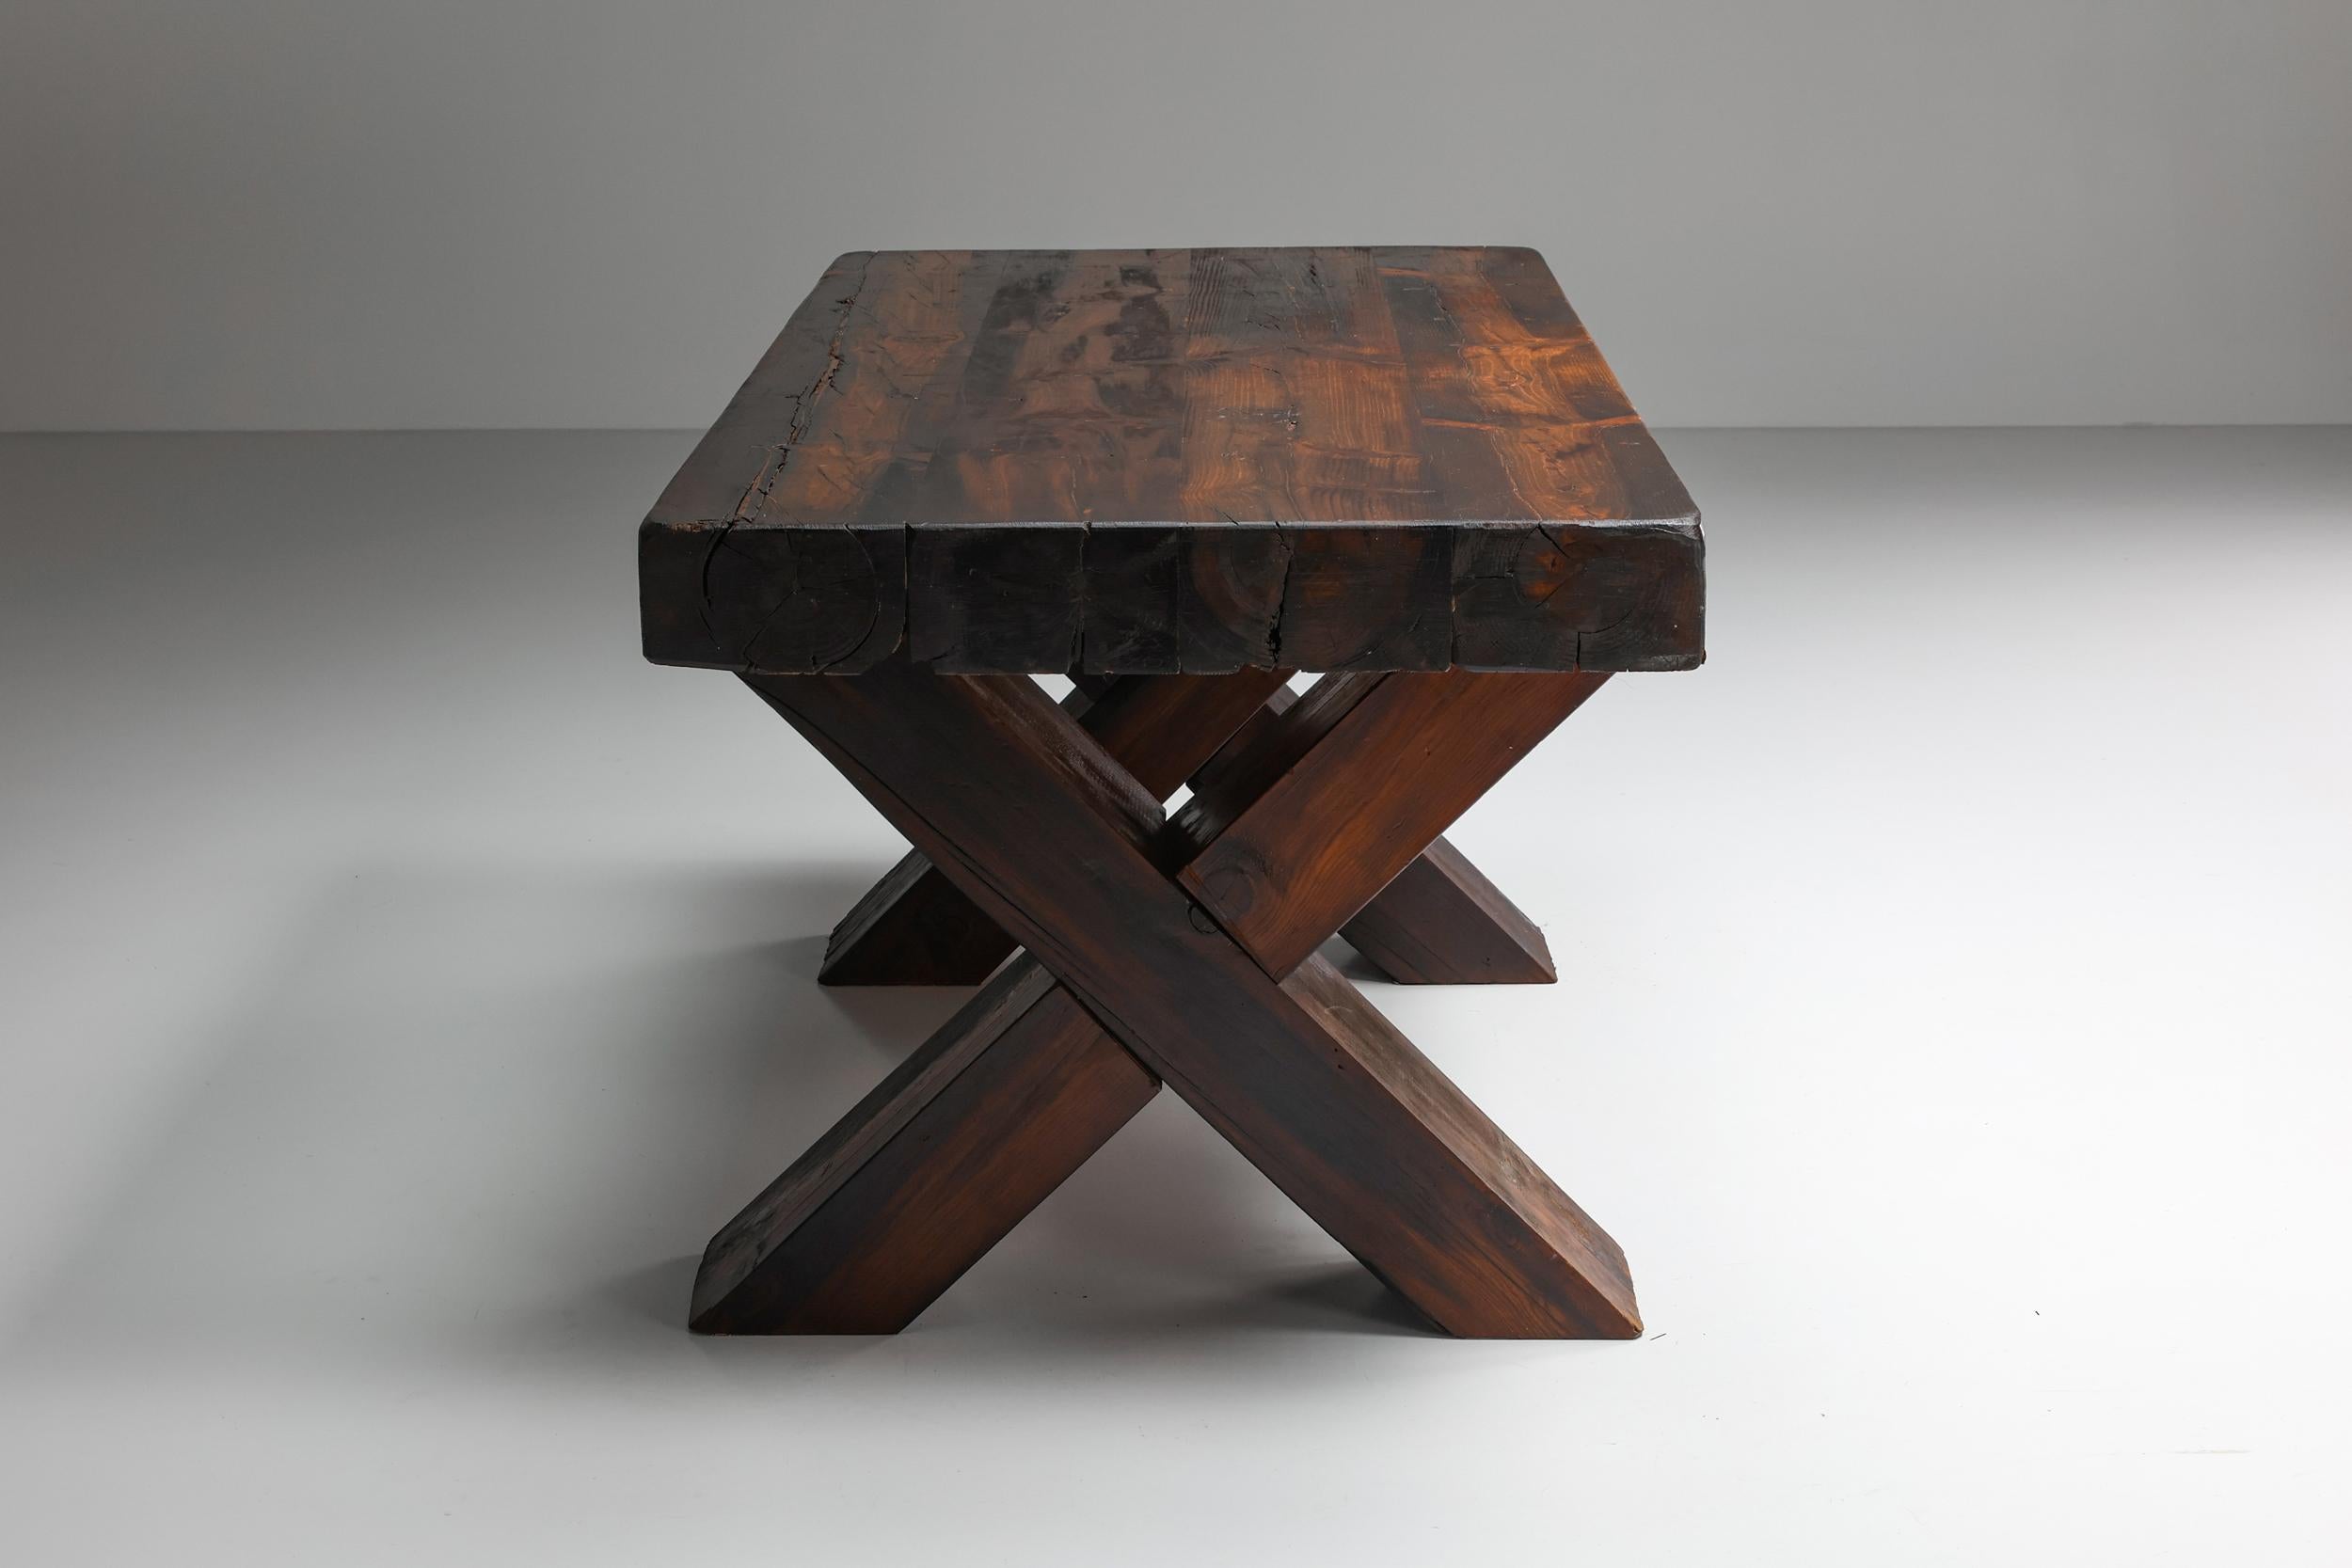 Rustic Brutalist Dark Wooden Dining Table with X-Legs, Italy, 1940's For Sale 1